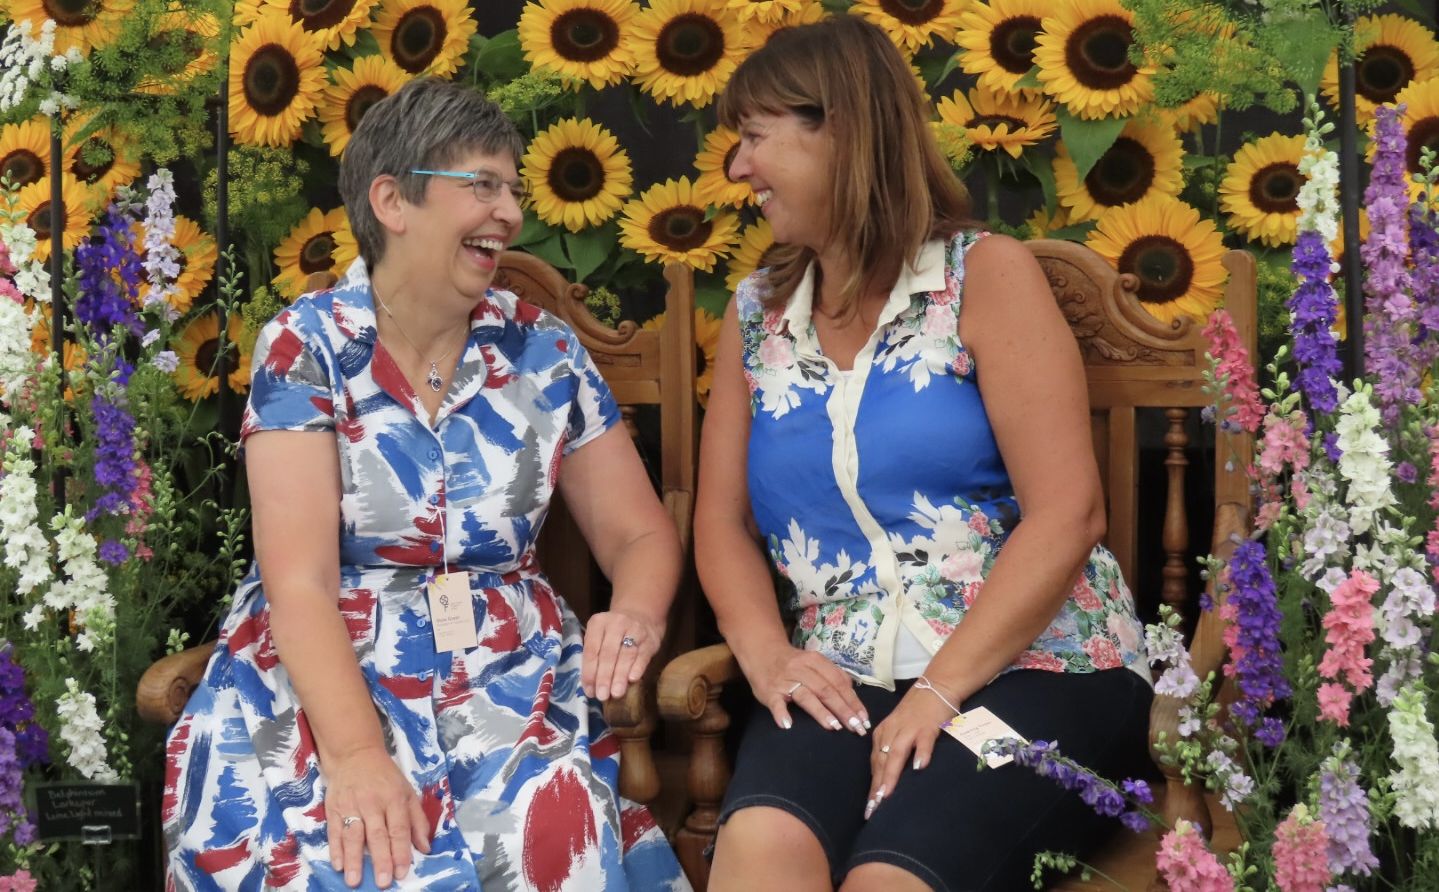 Dr Karen Groves MBE (left) with Nicky Green the owner of Poplar Farm Flowers at Southport Flower Show 2022. Photo by Andrew Brown Media